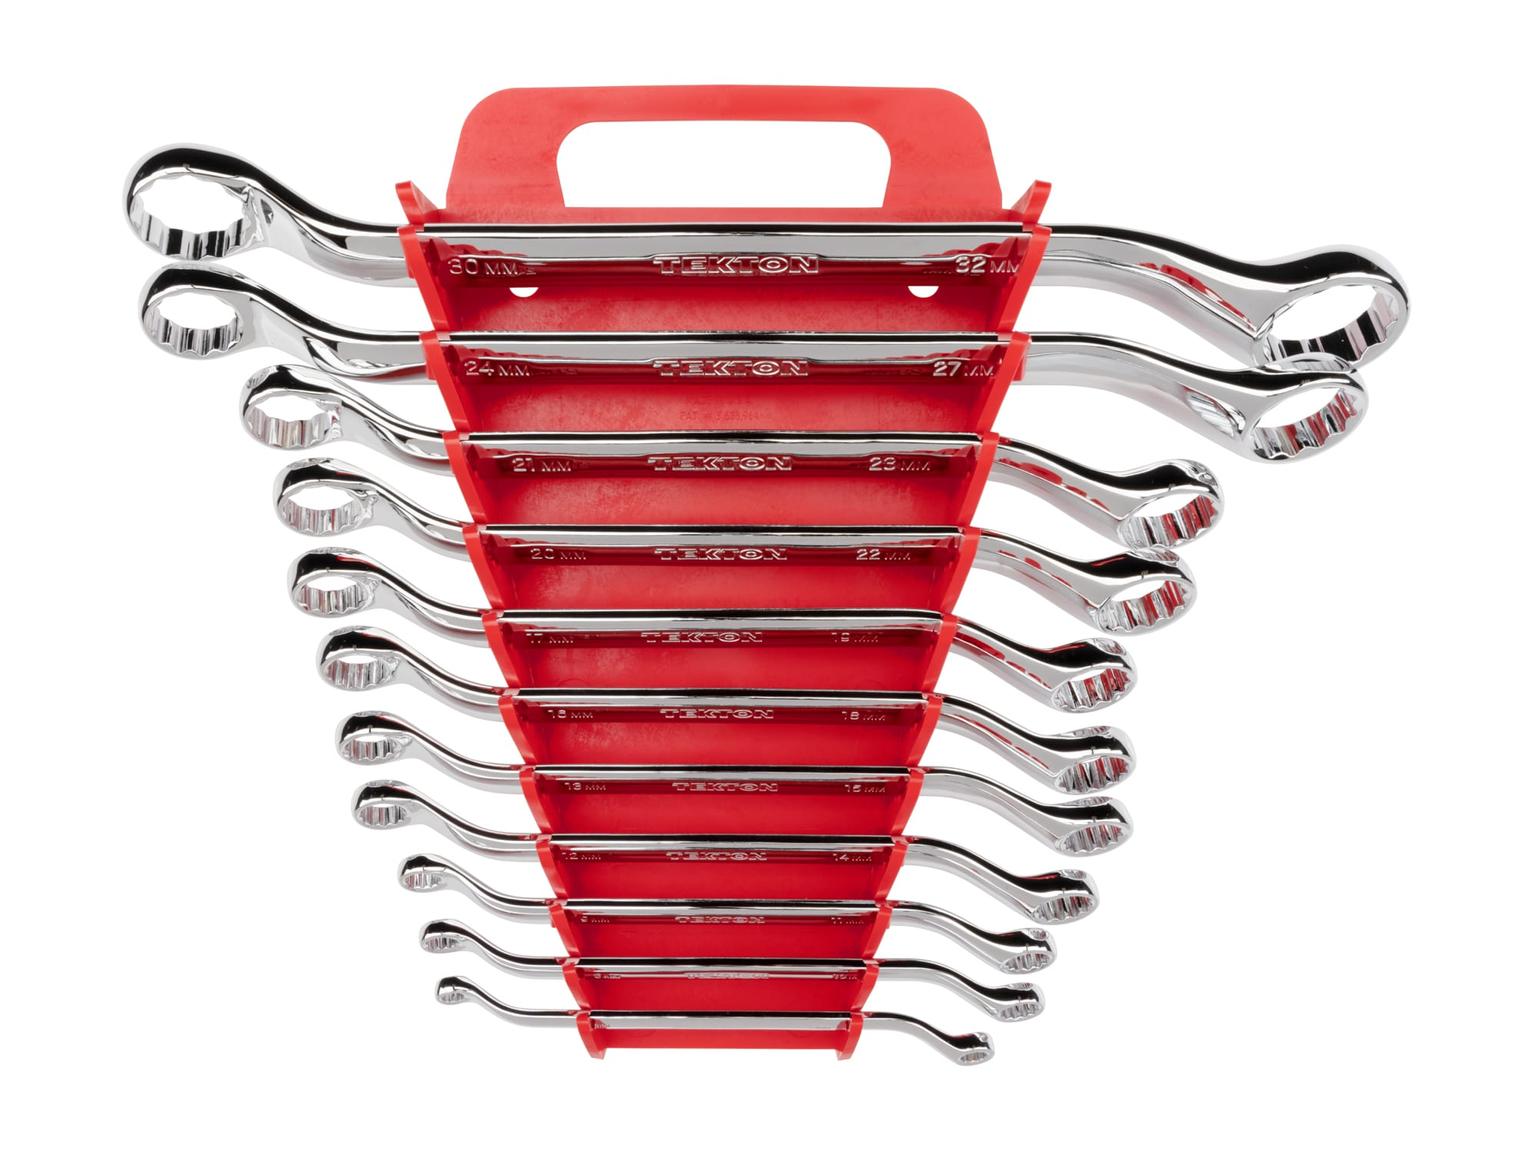 45-Degree Offset Box End Wrench Set, 11-Piece (Holder)